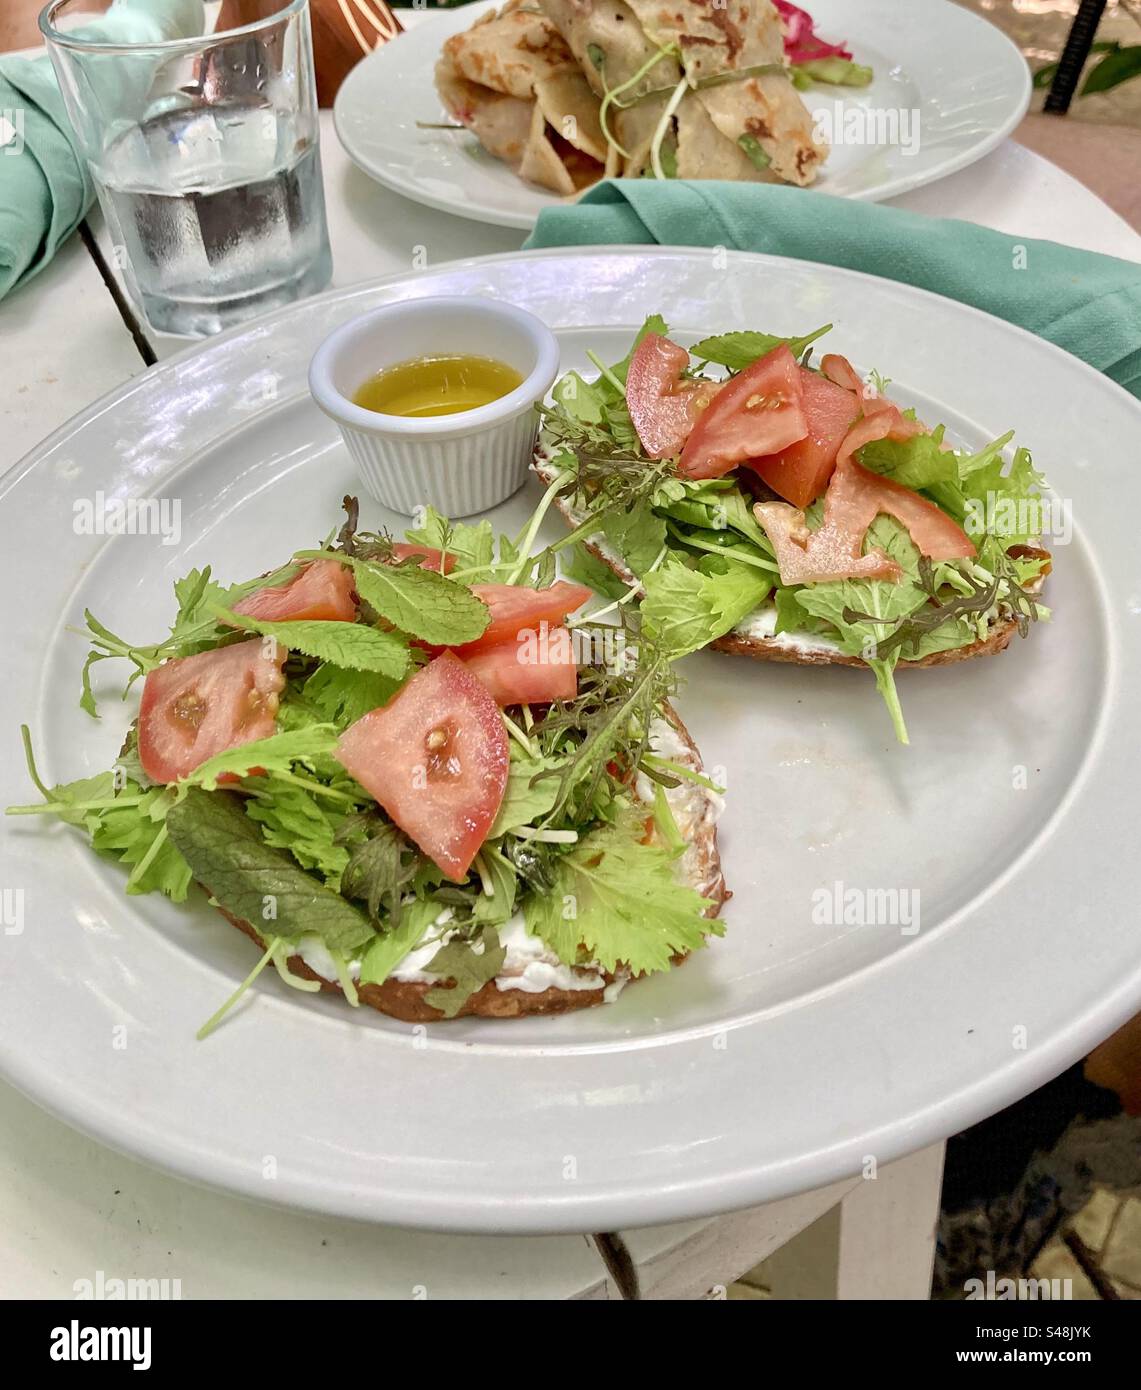 Multigrain bread covered in soft goat cheese, leafy greens and tomatoes with a side of olive oil. Stock Photo